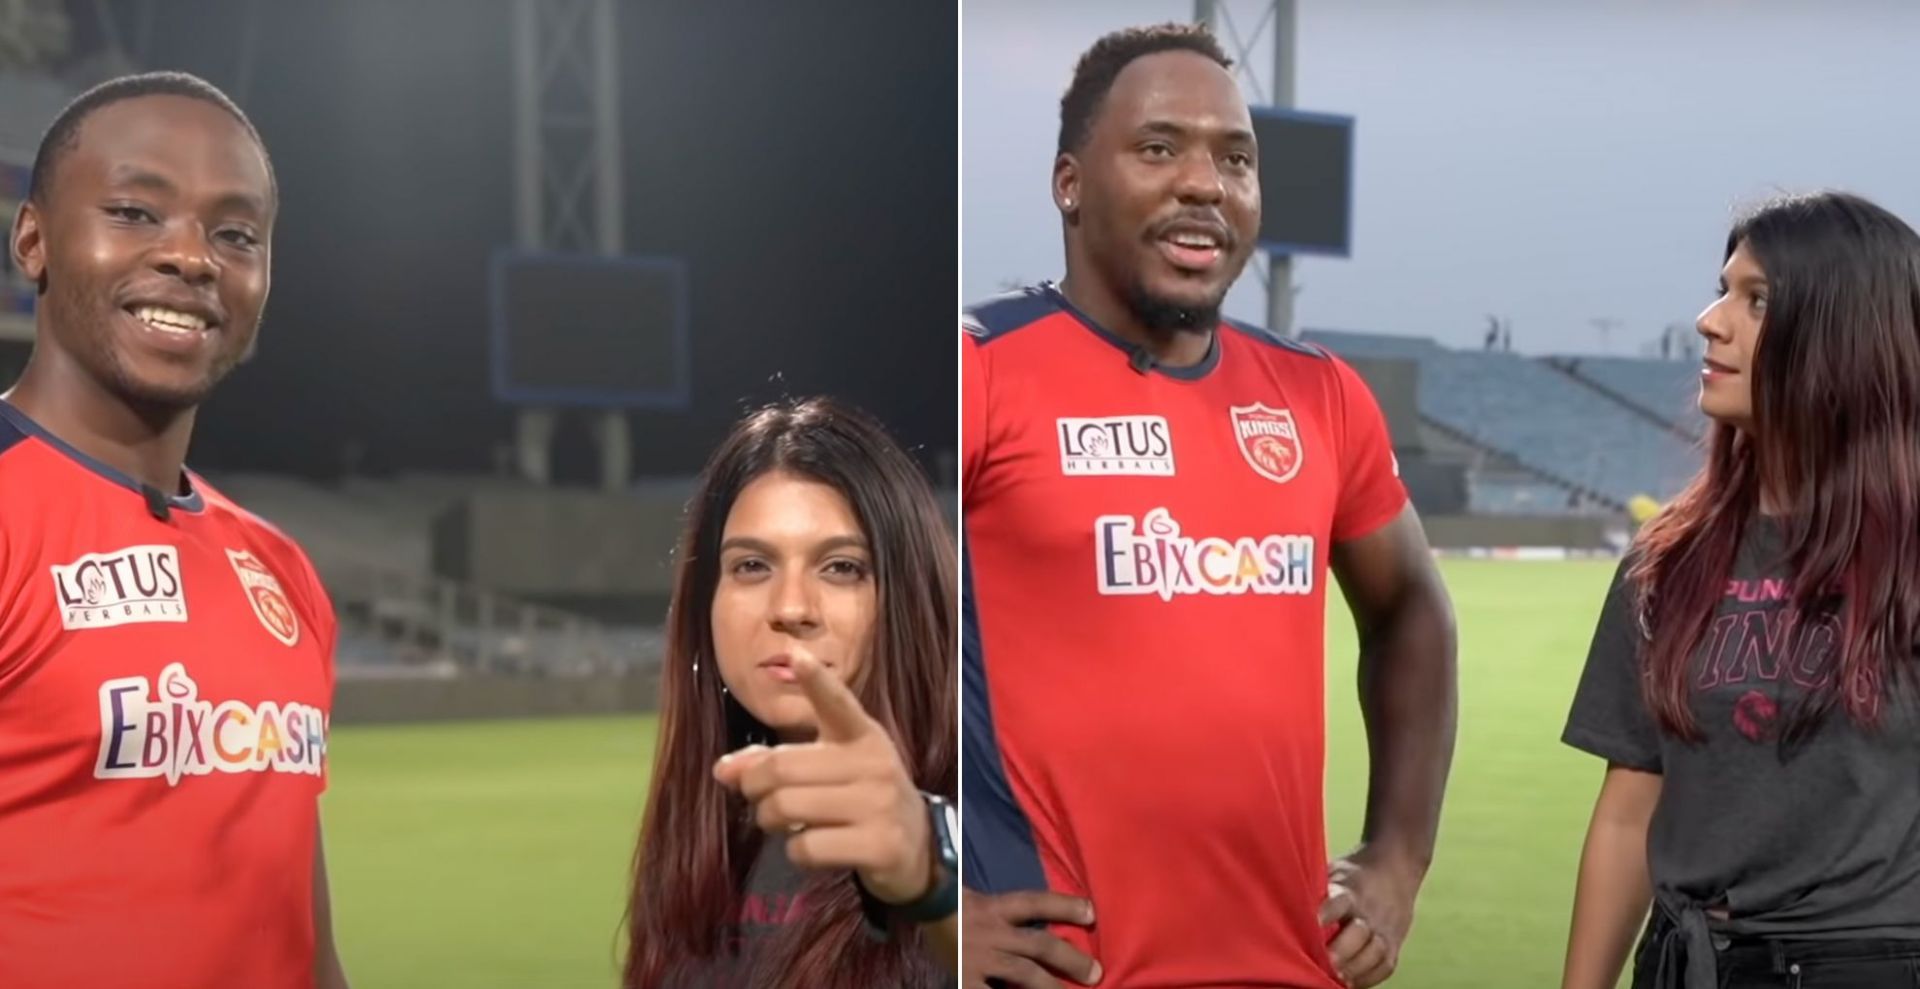 PBKS cricketers deliver dialogues in Hindi (Credits: Twitter)